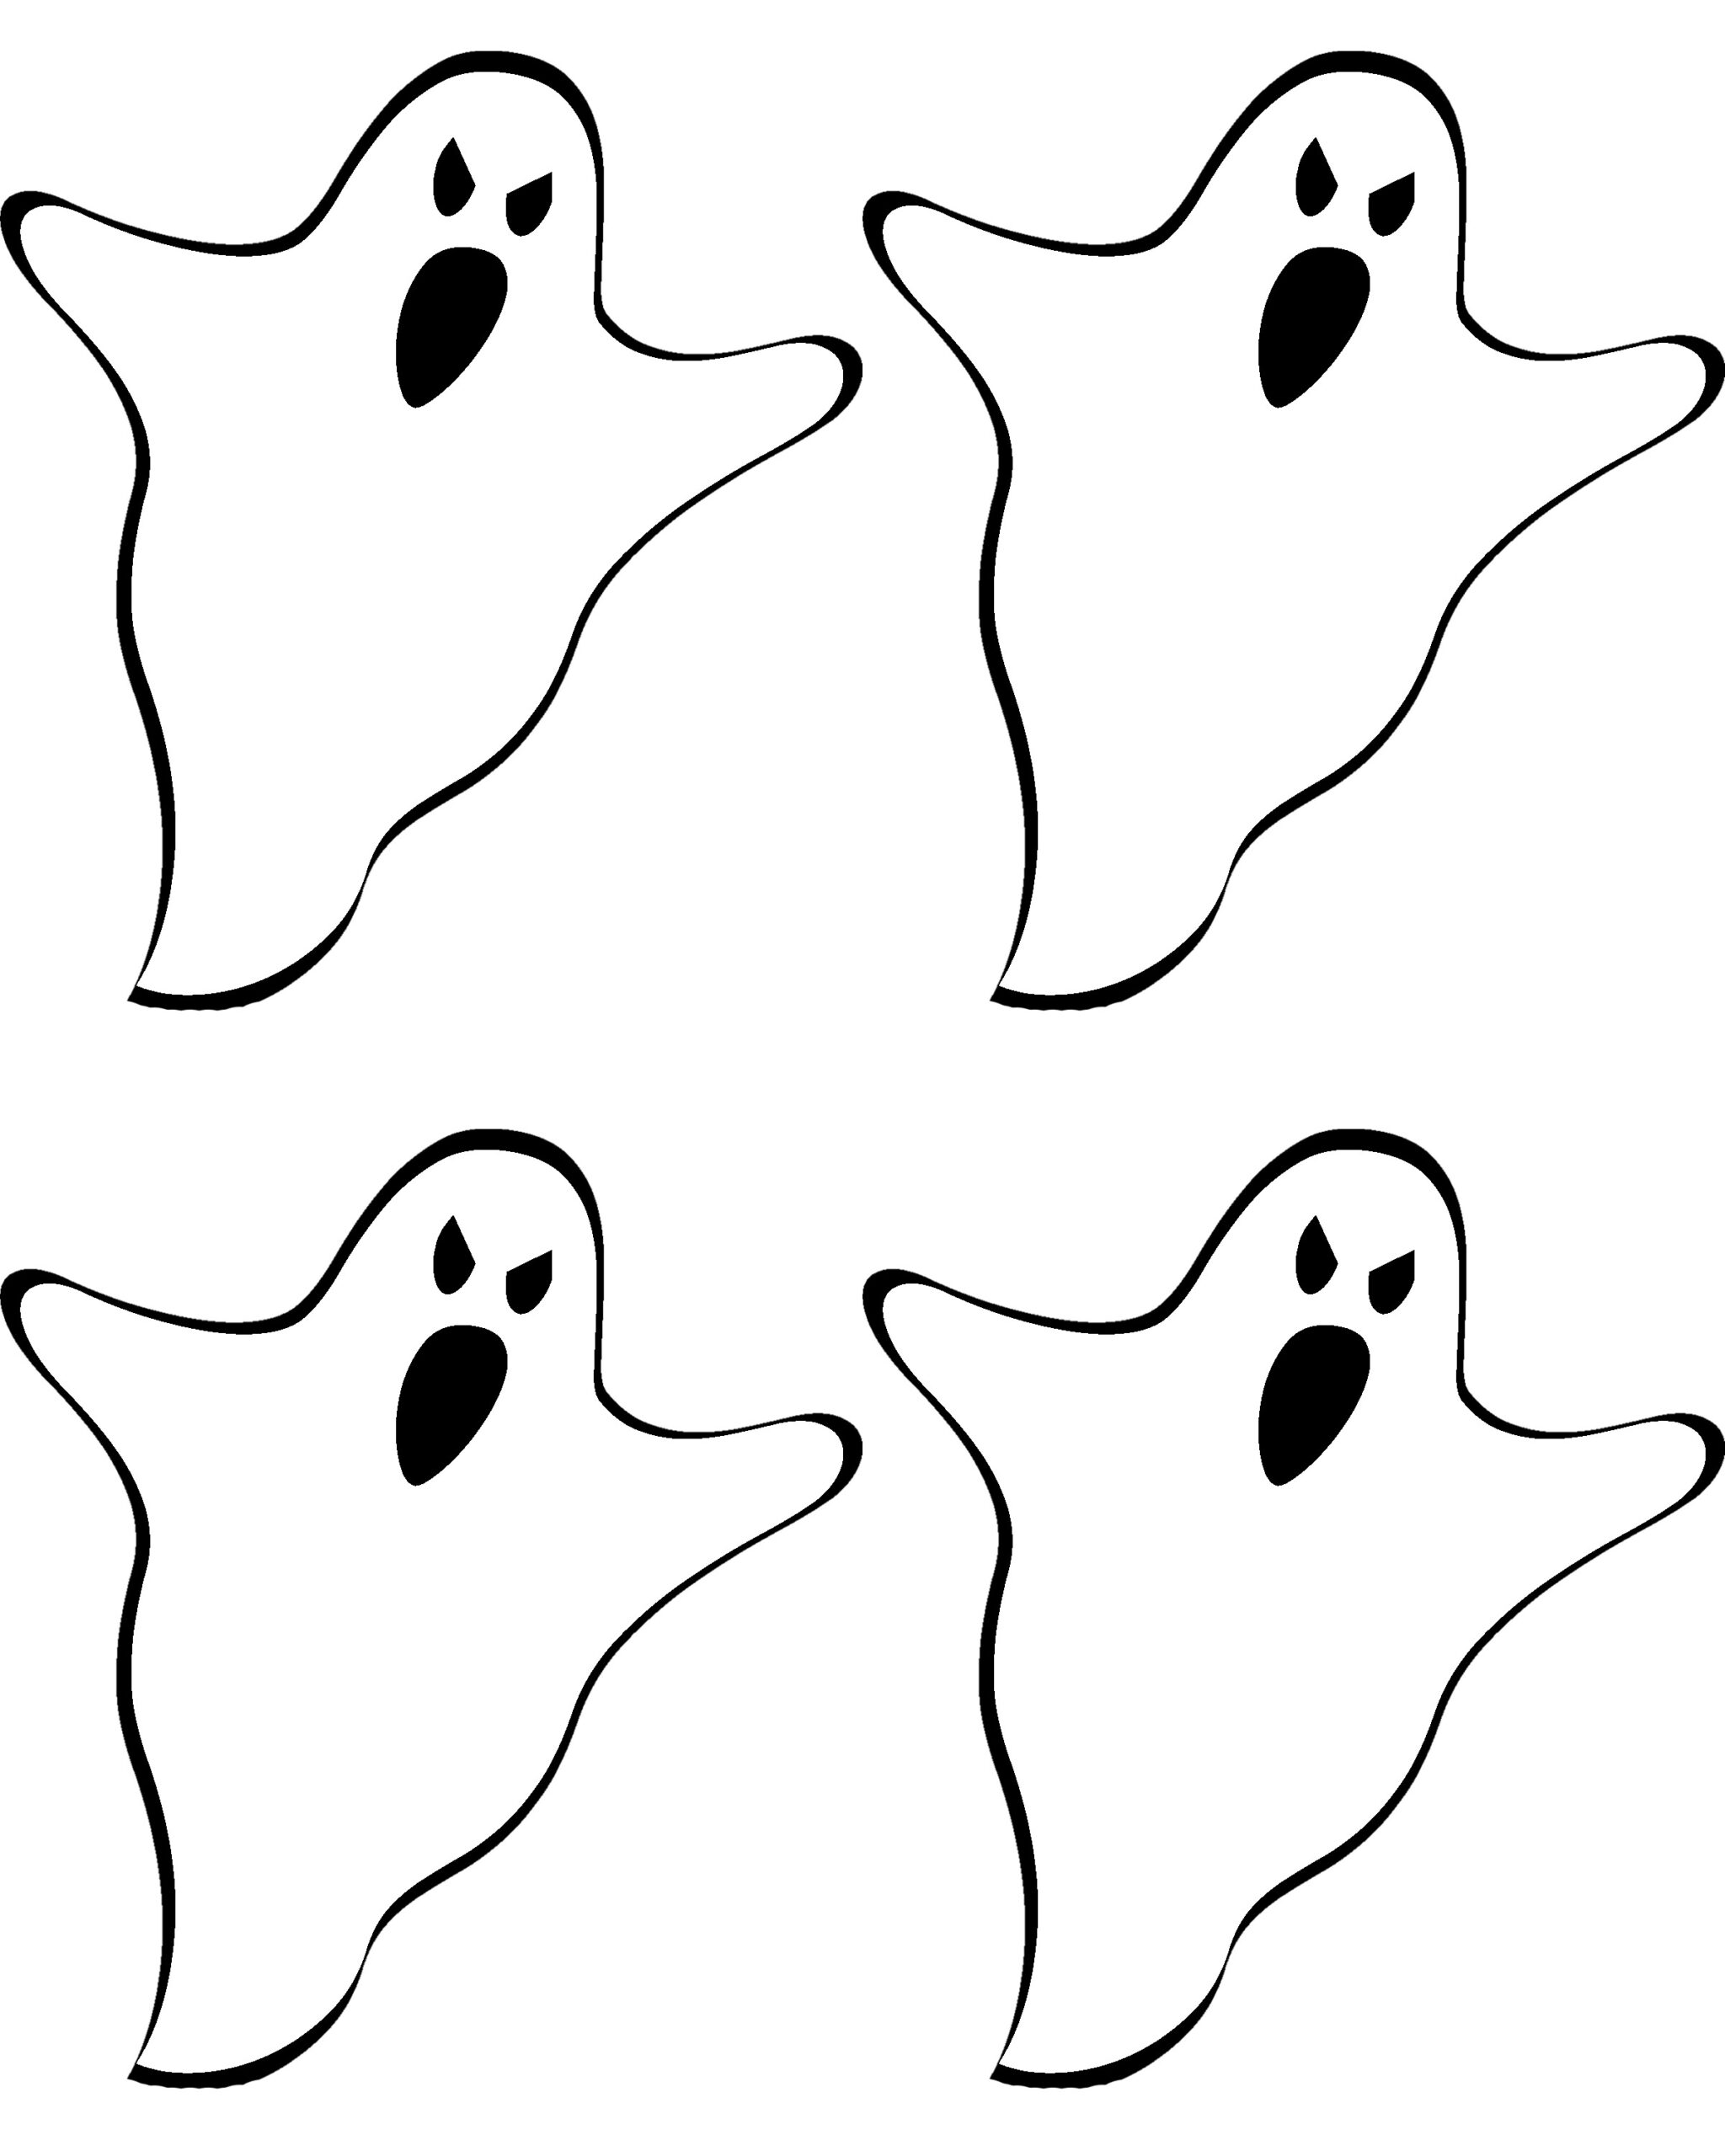 Haunted House Silhouette Template At GetDrawings Free Download